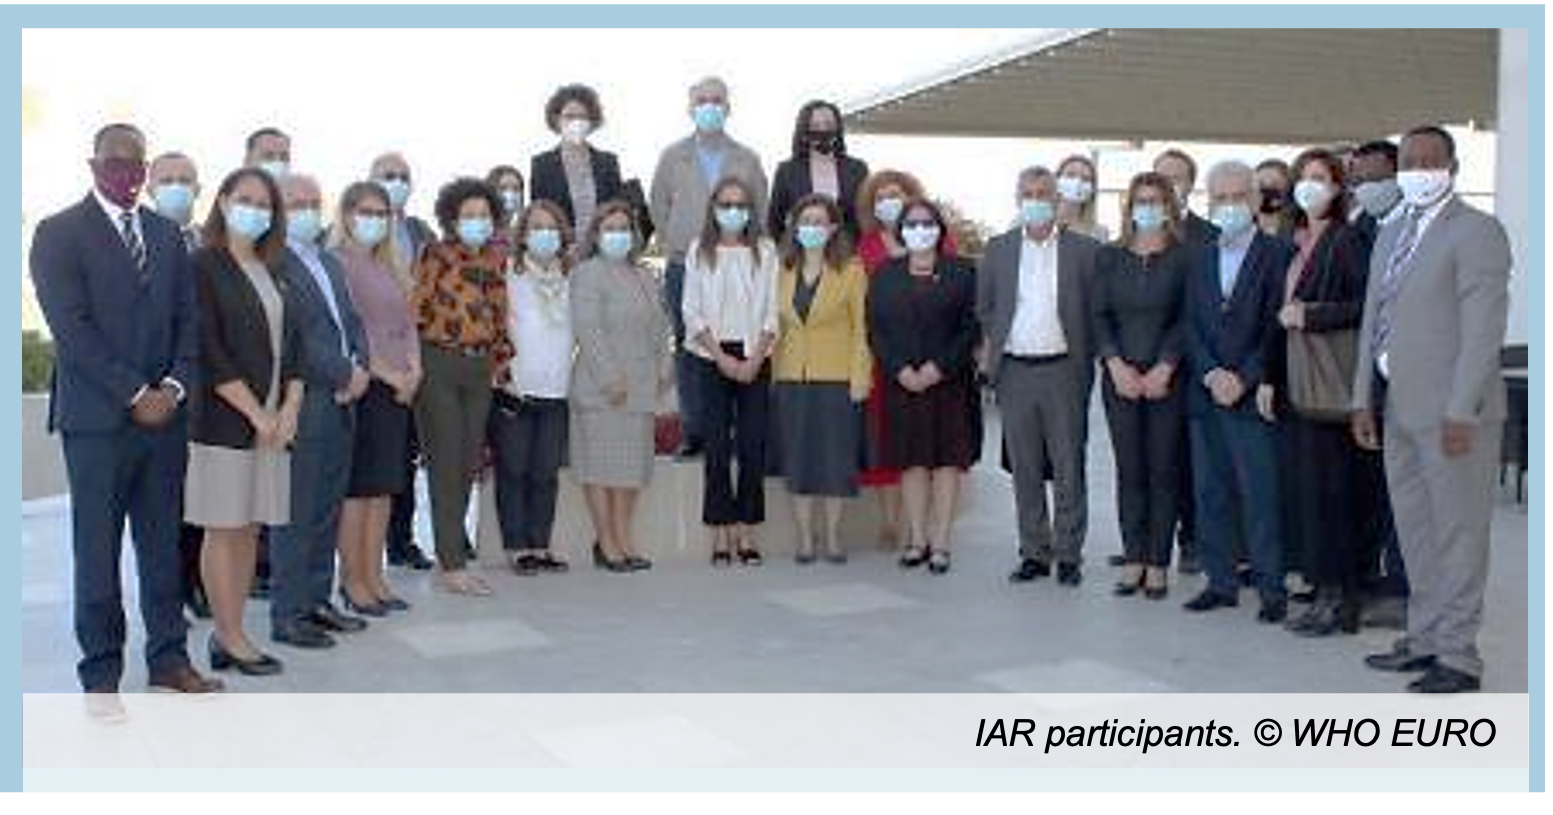 Intra-Action Review (IAR) for course correction and refinement